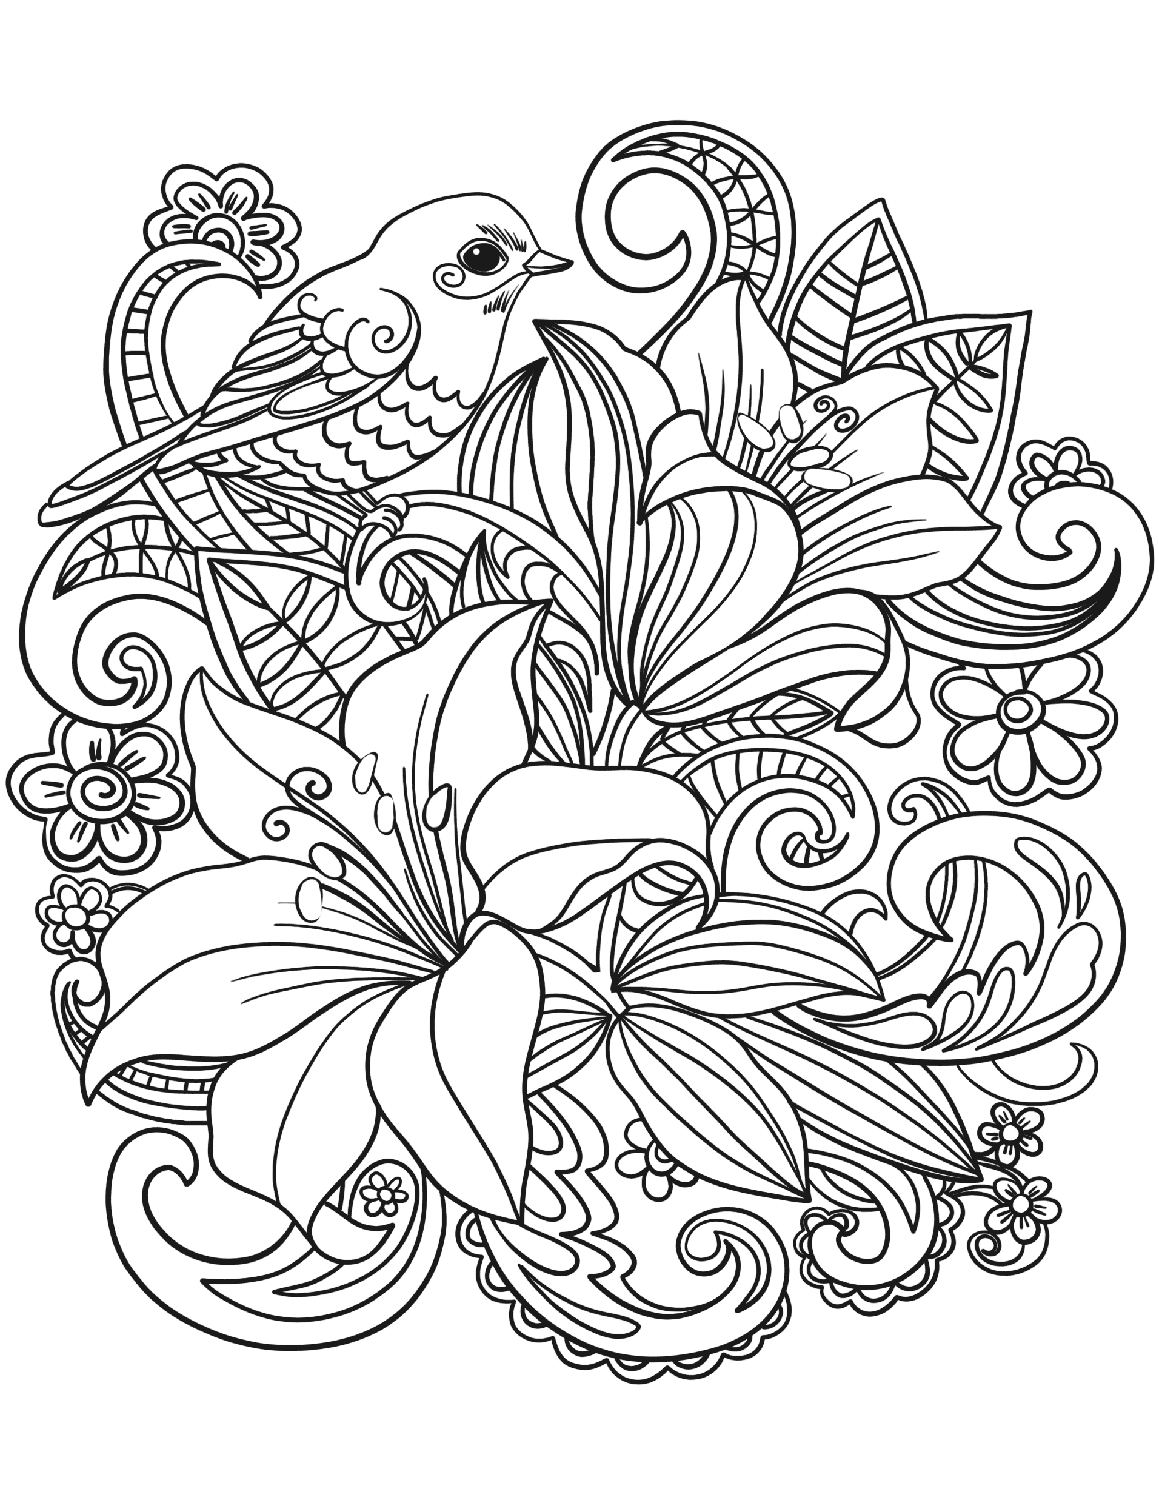 Floral Coloring Pages for Adults - Best Coloring Pages For ...